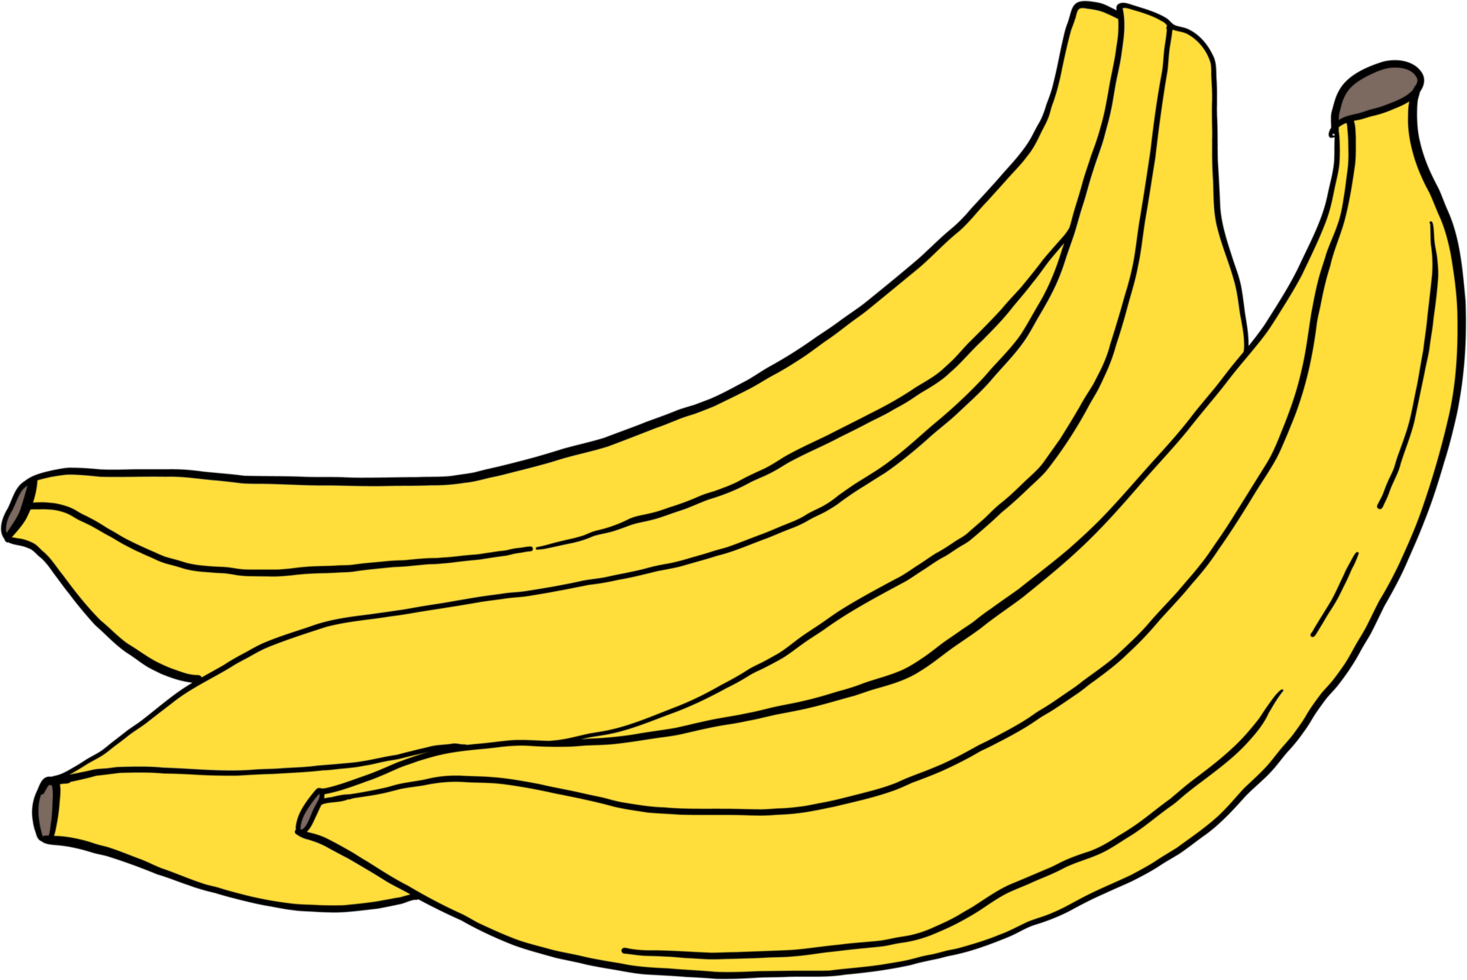 oodle freehand sketch drawing of banana fruit. png